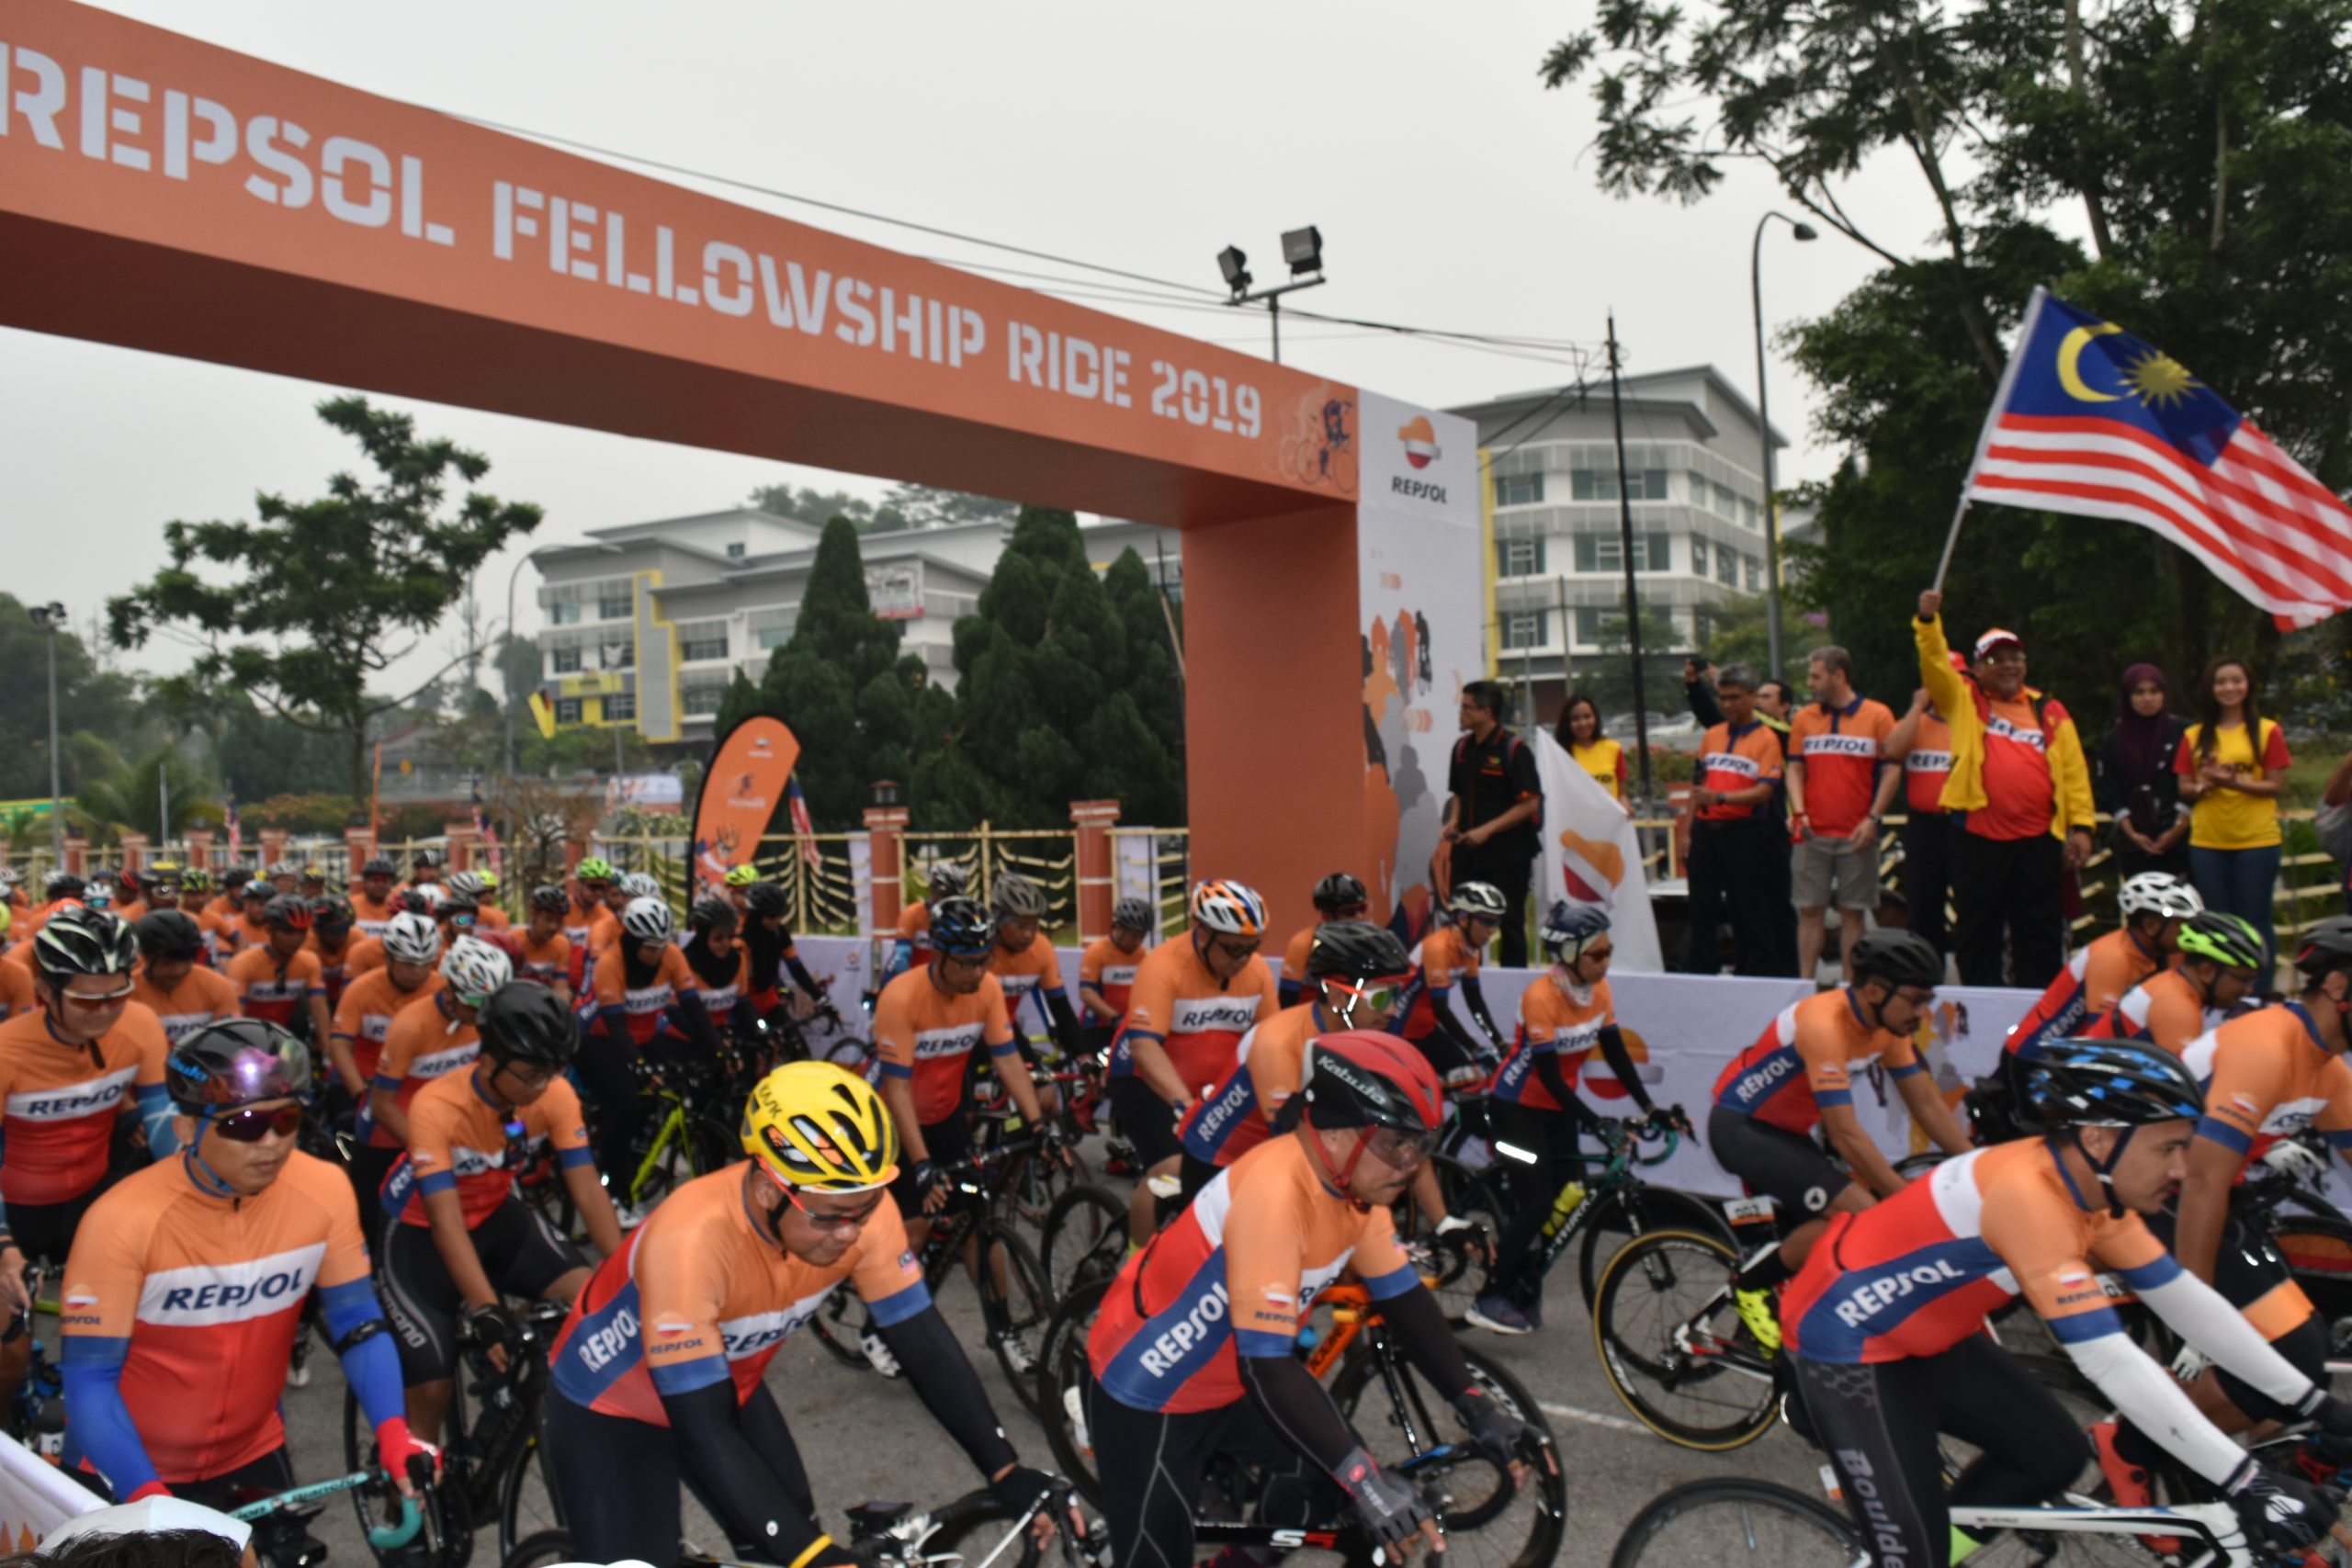 Over 1,000 cyclists for Repsol Malaysia